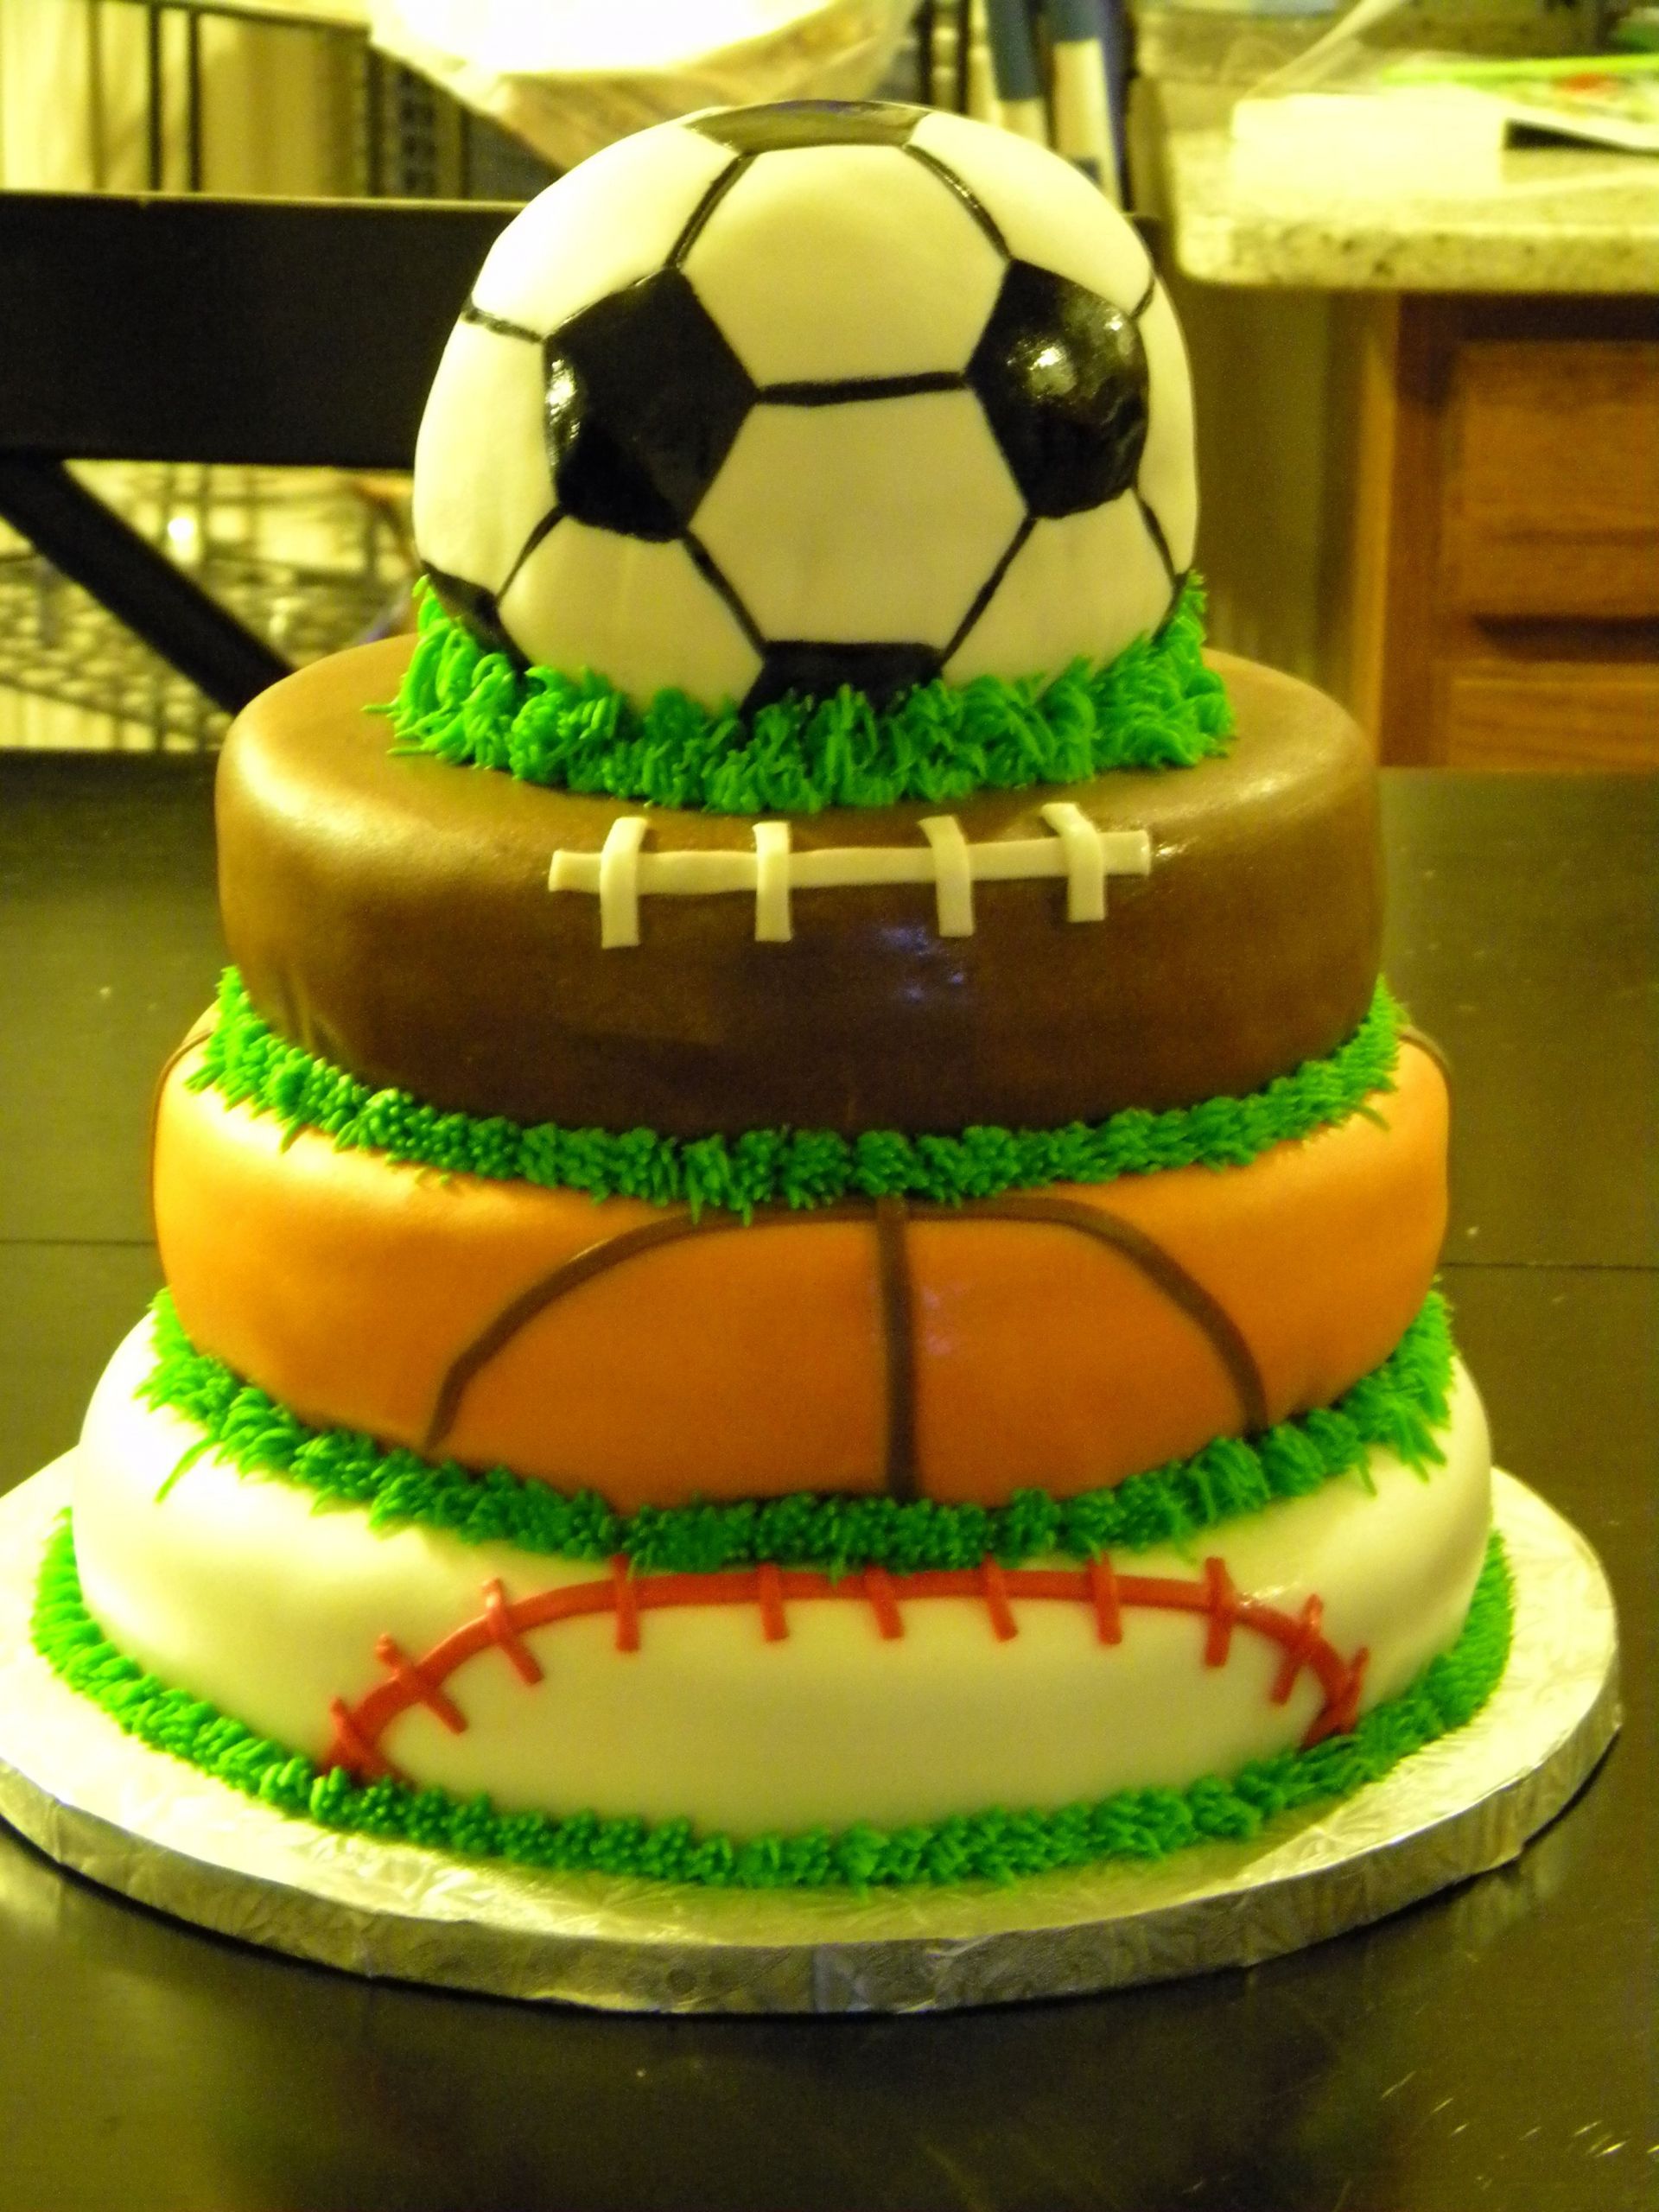 Sports Themed Birthday Cakes
 Sports Theme Cake Inspired by a photo I saw on here All